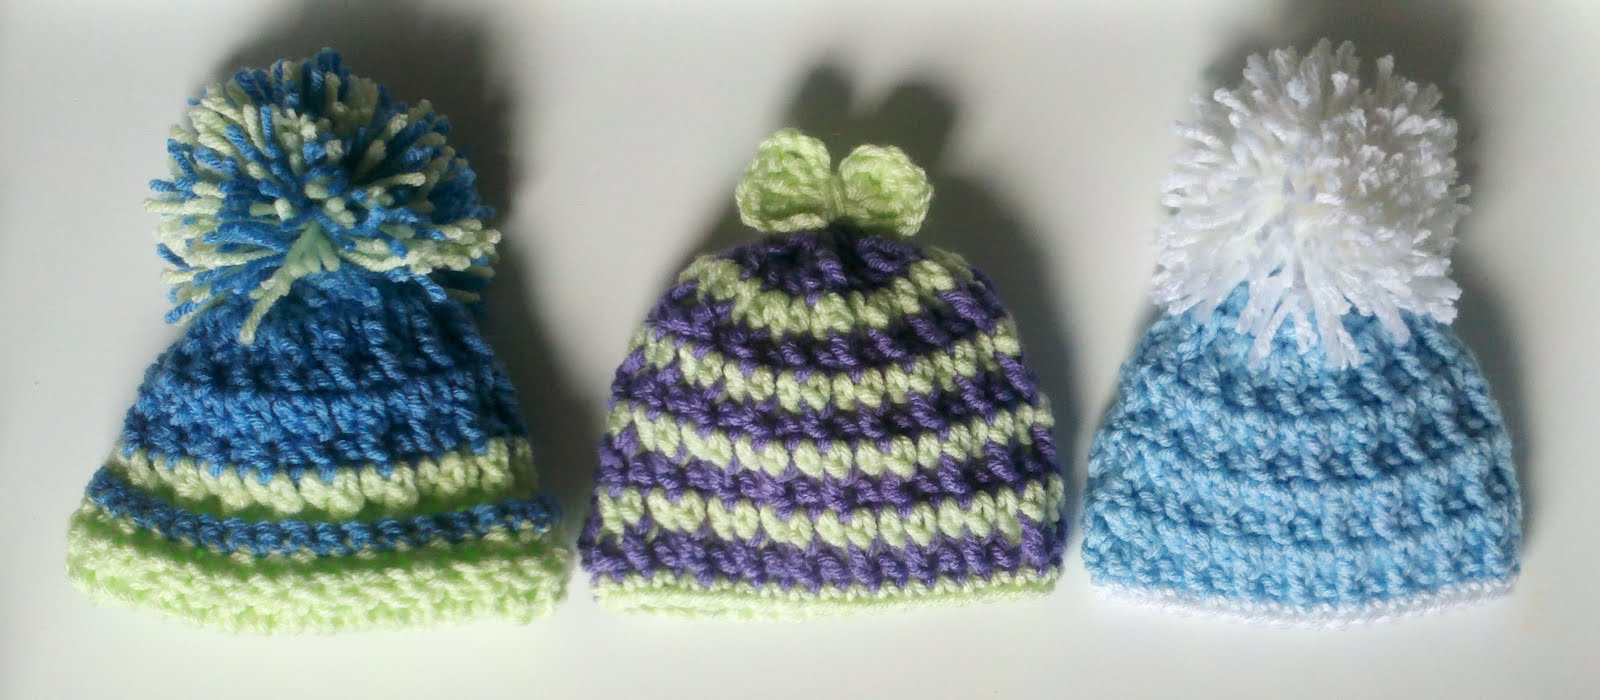 How can i knit a hat for &quot;preemie&quot; babies? - Yahoo!7 Answers